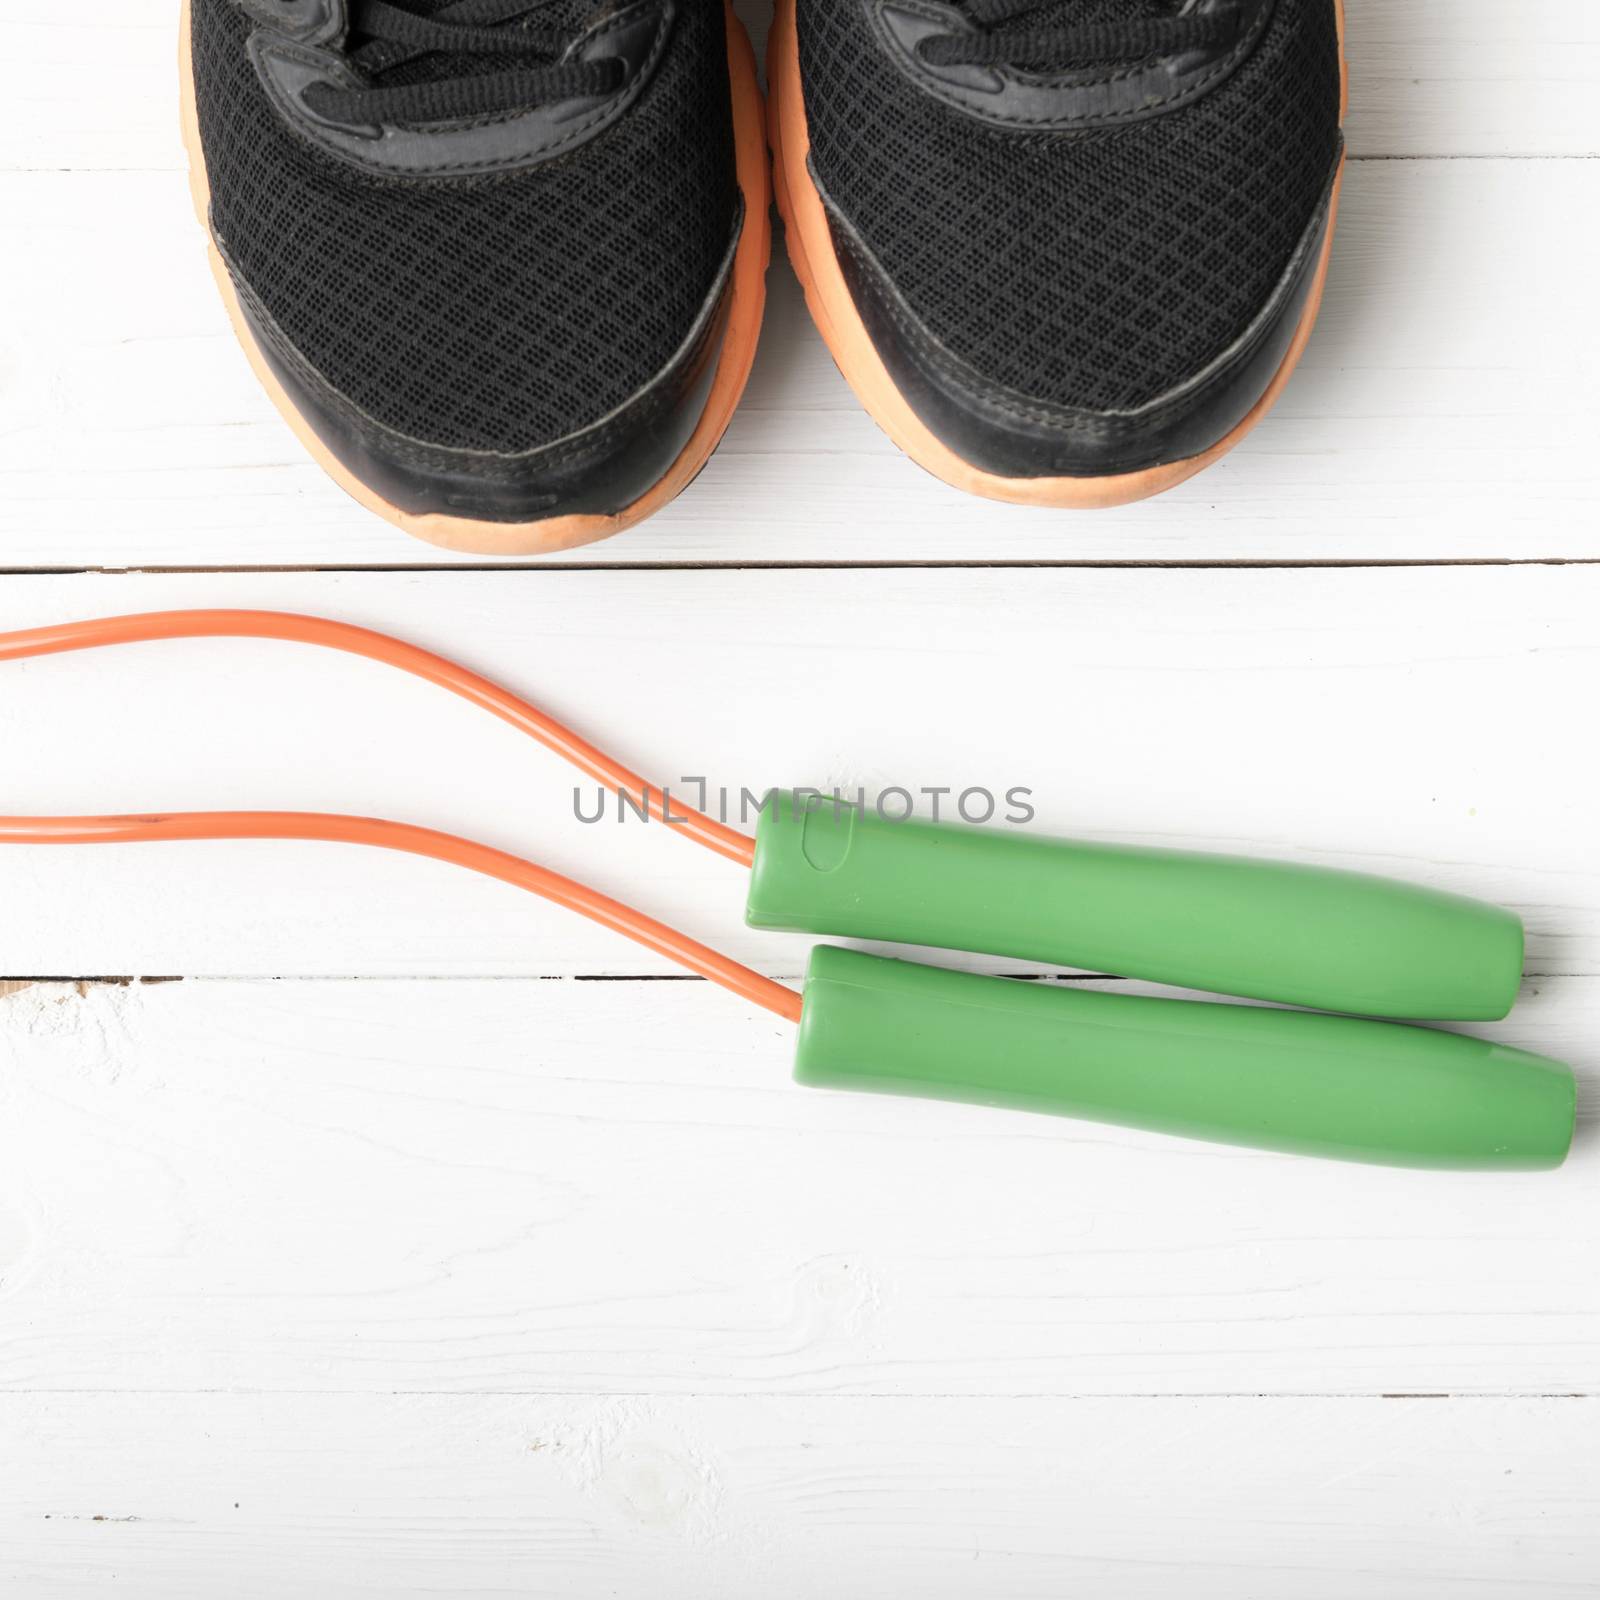 running shoes and jumping rope on white table